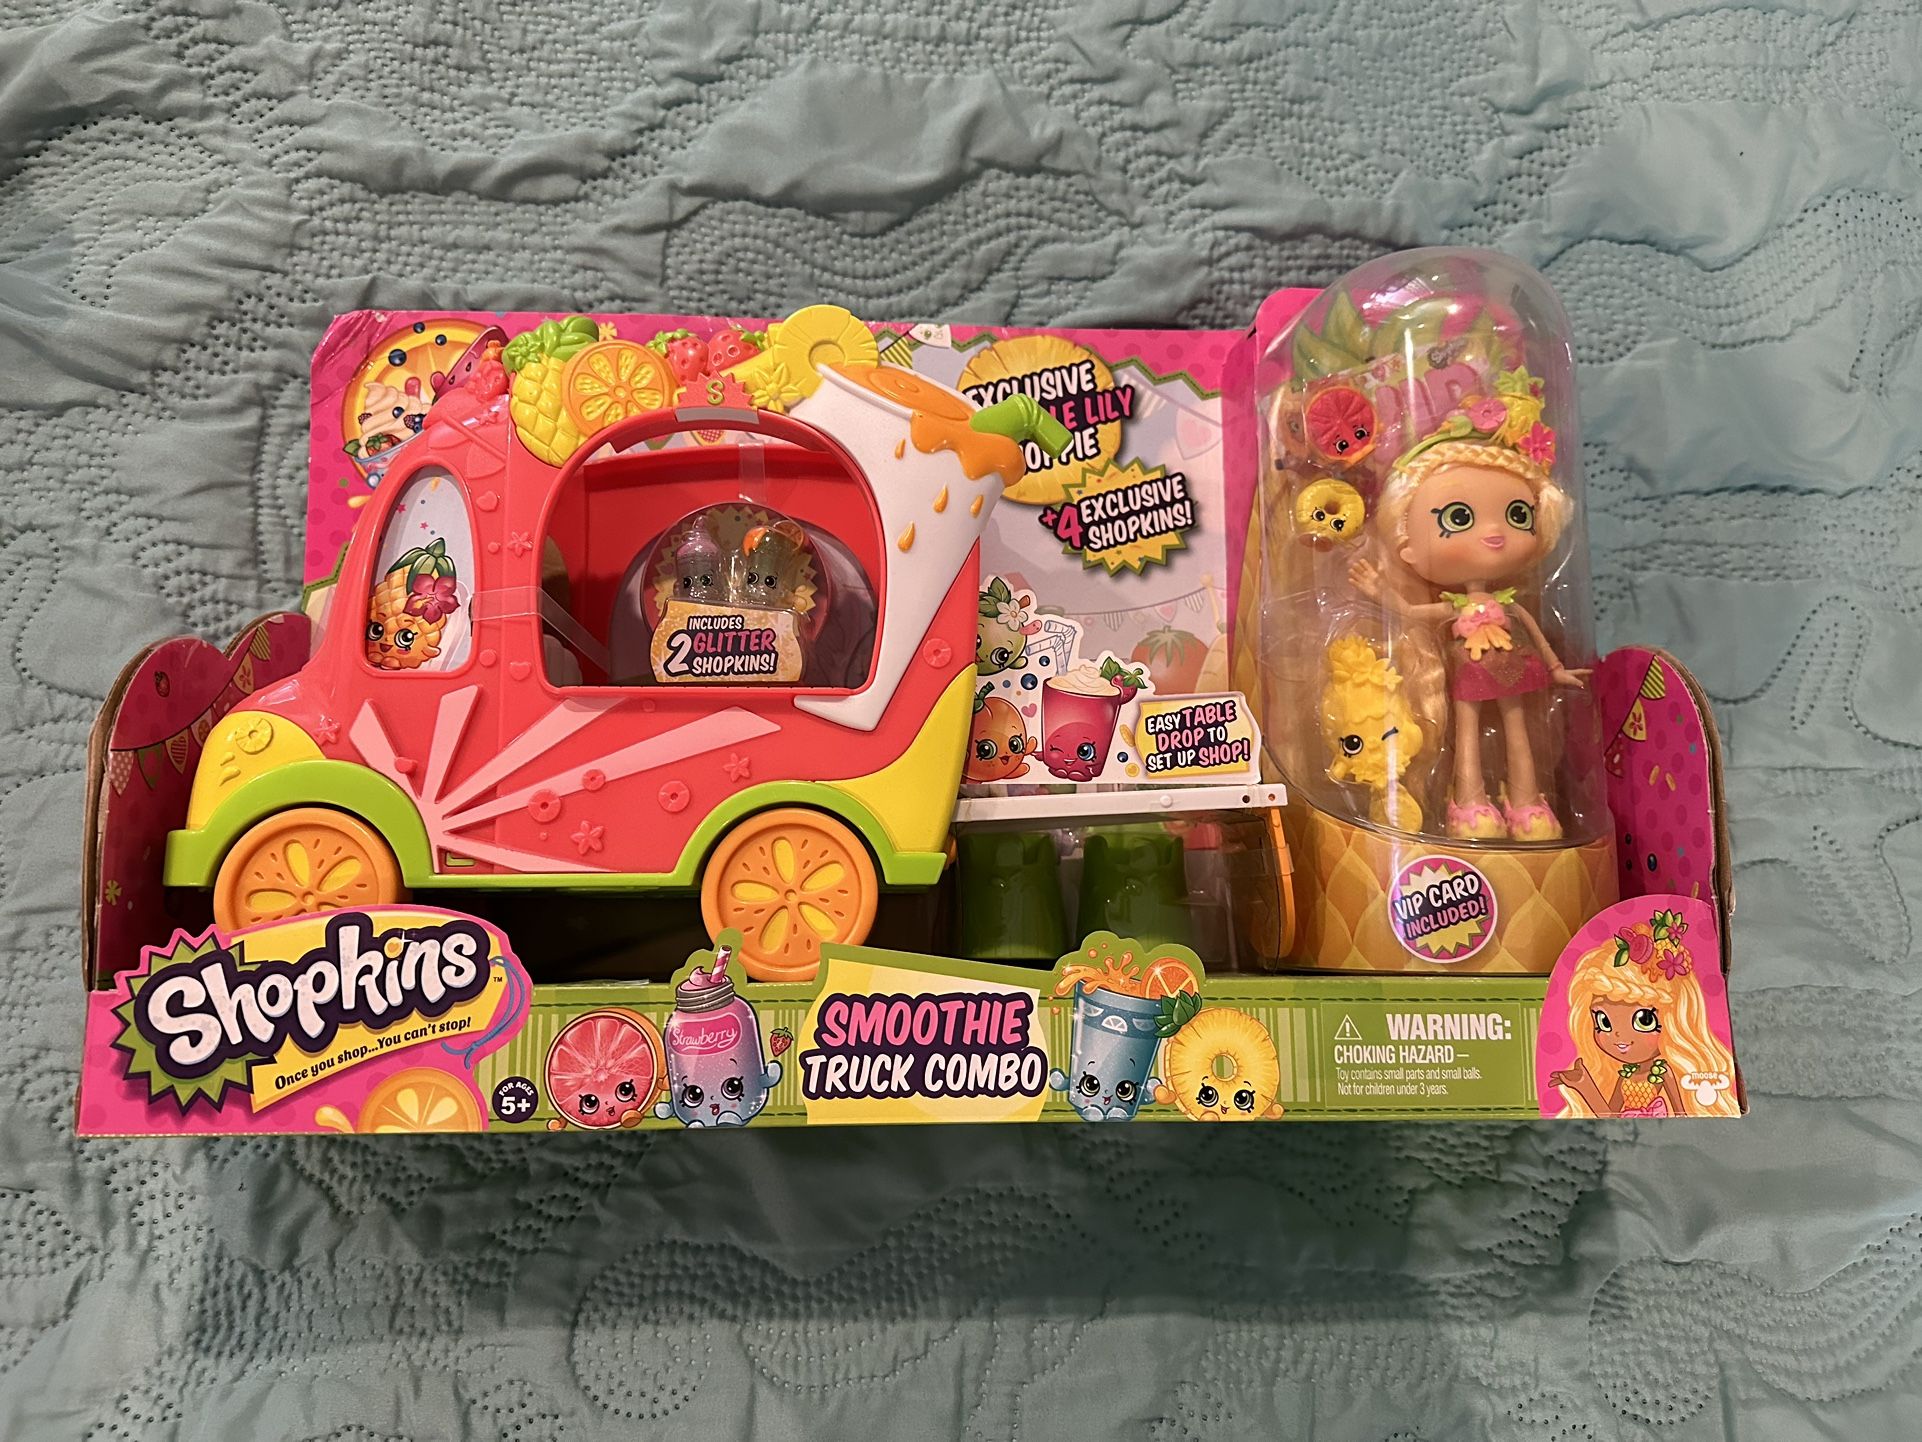 Shopkins Smoothie Truck Combo